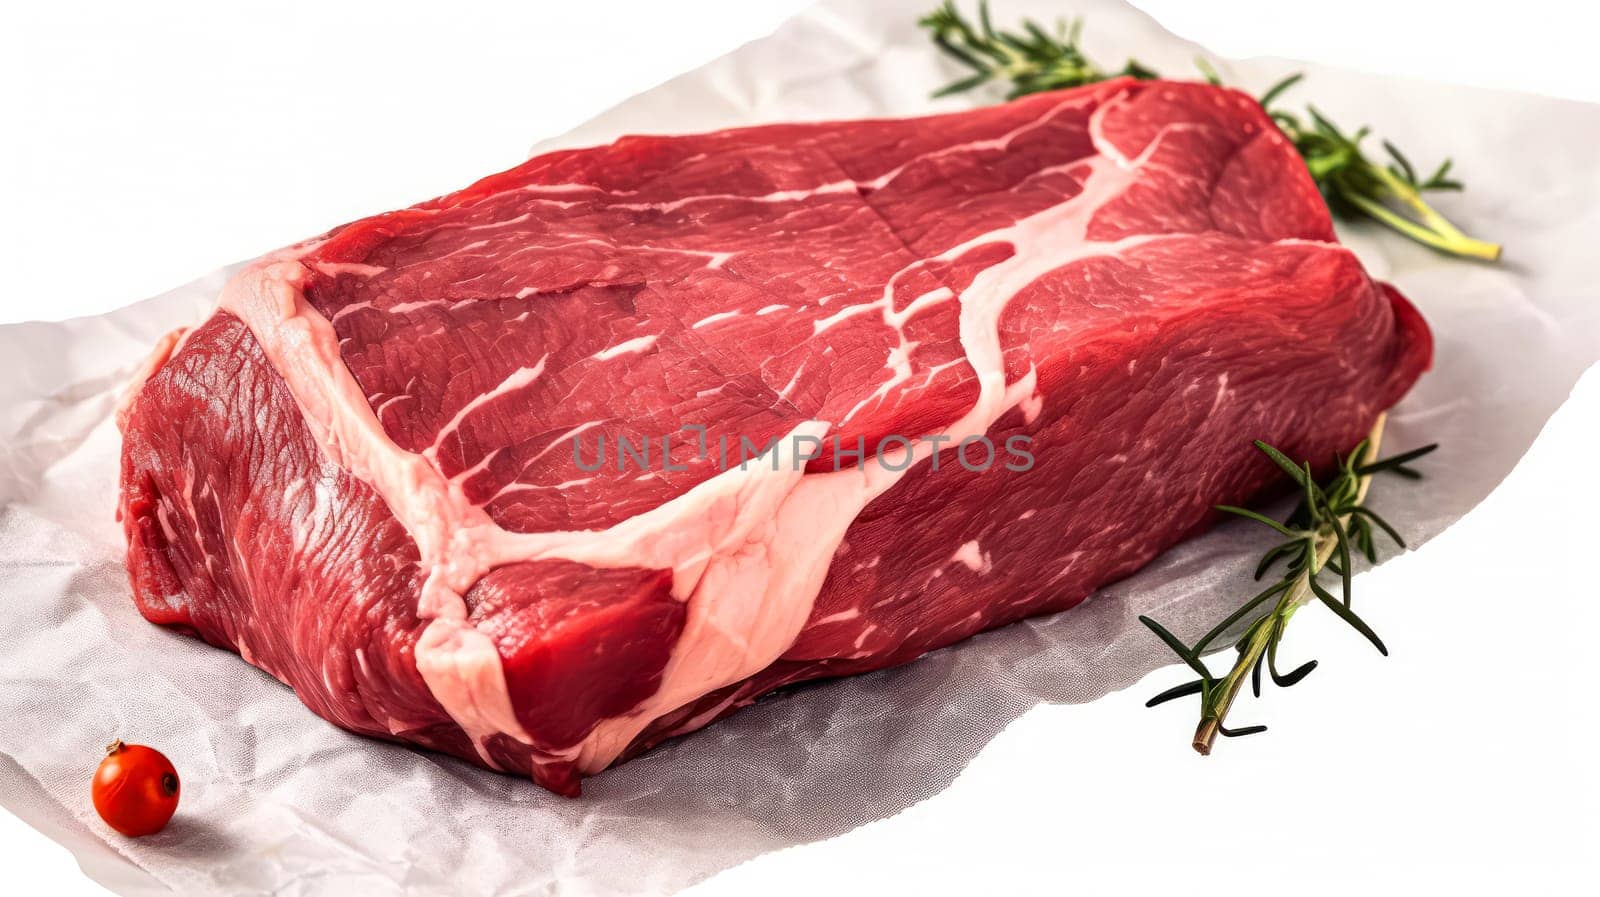 Gourmet preparation, Raw beef tenderloin on parchment with spices and herbs, a culinary elegance on a white isolated background in stock photos.